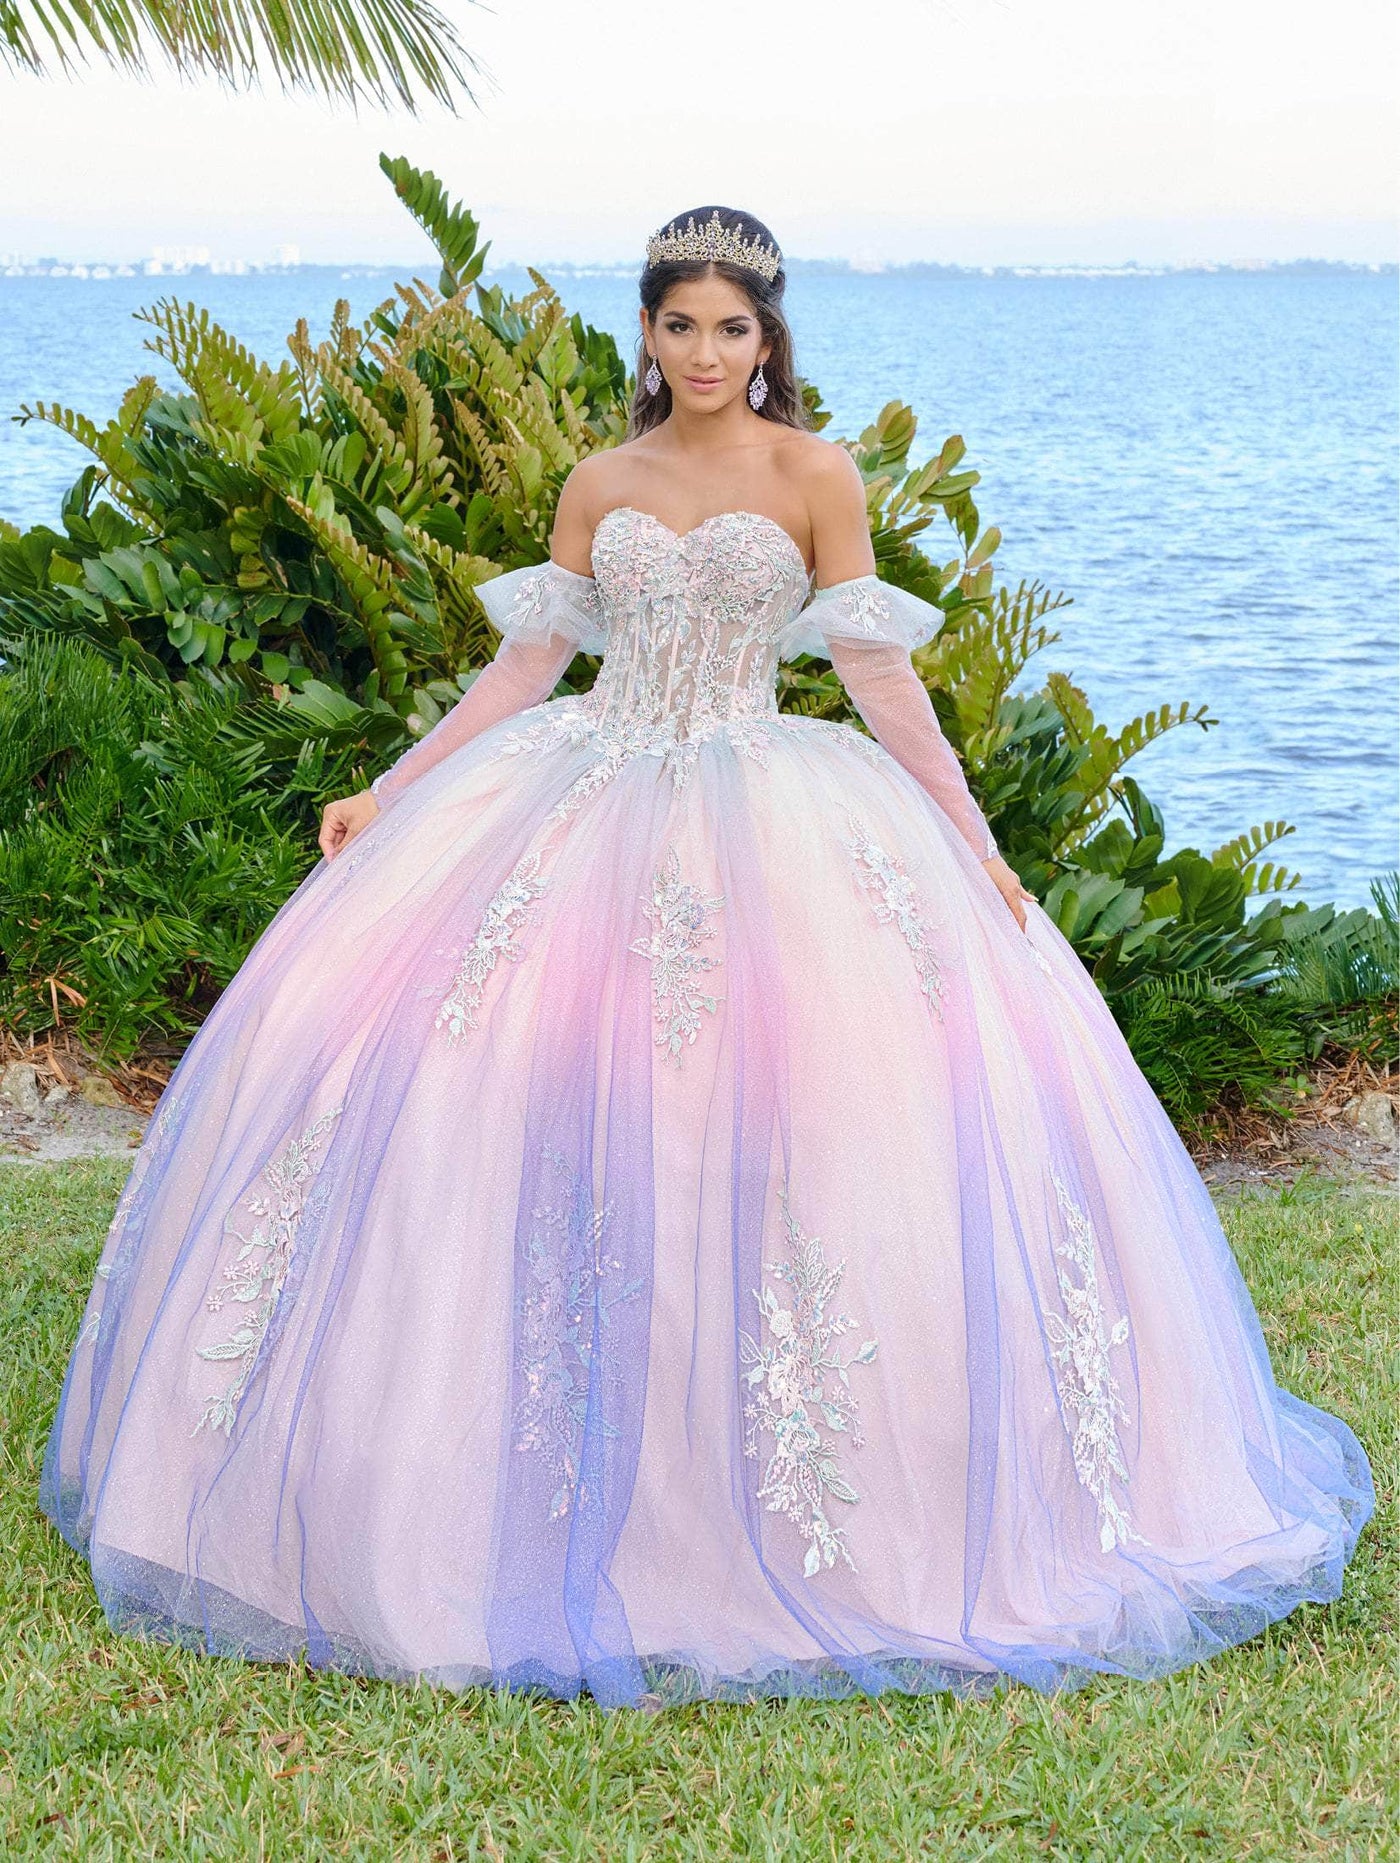 Fiesta Gowns 56499 - Corset Sweetheart Ballgown Special Occasion Dress